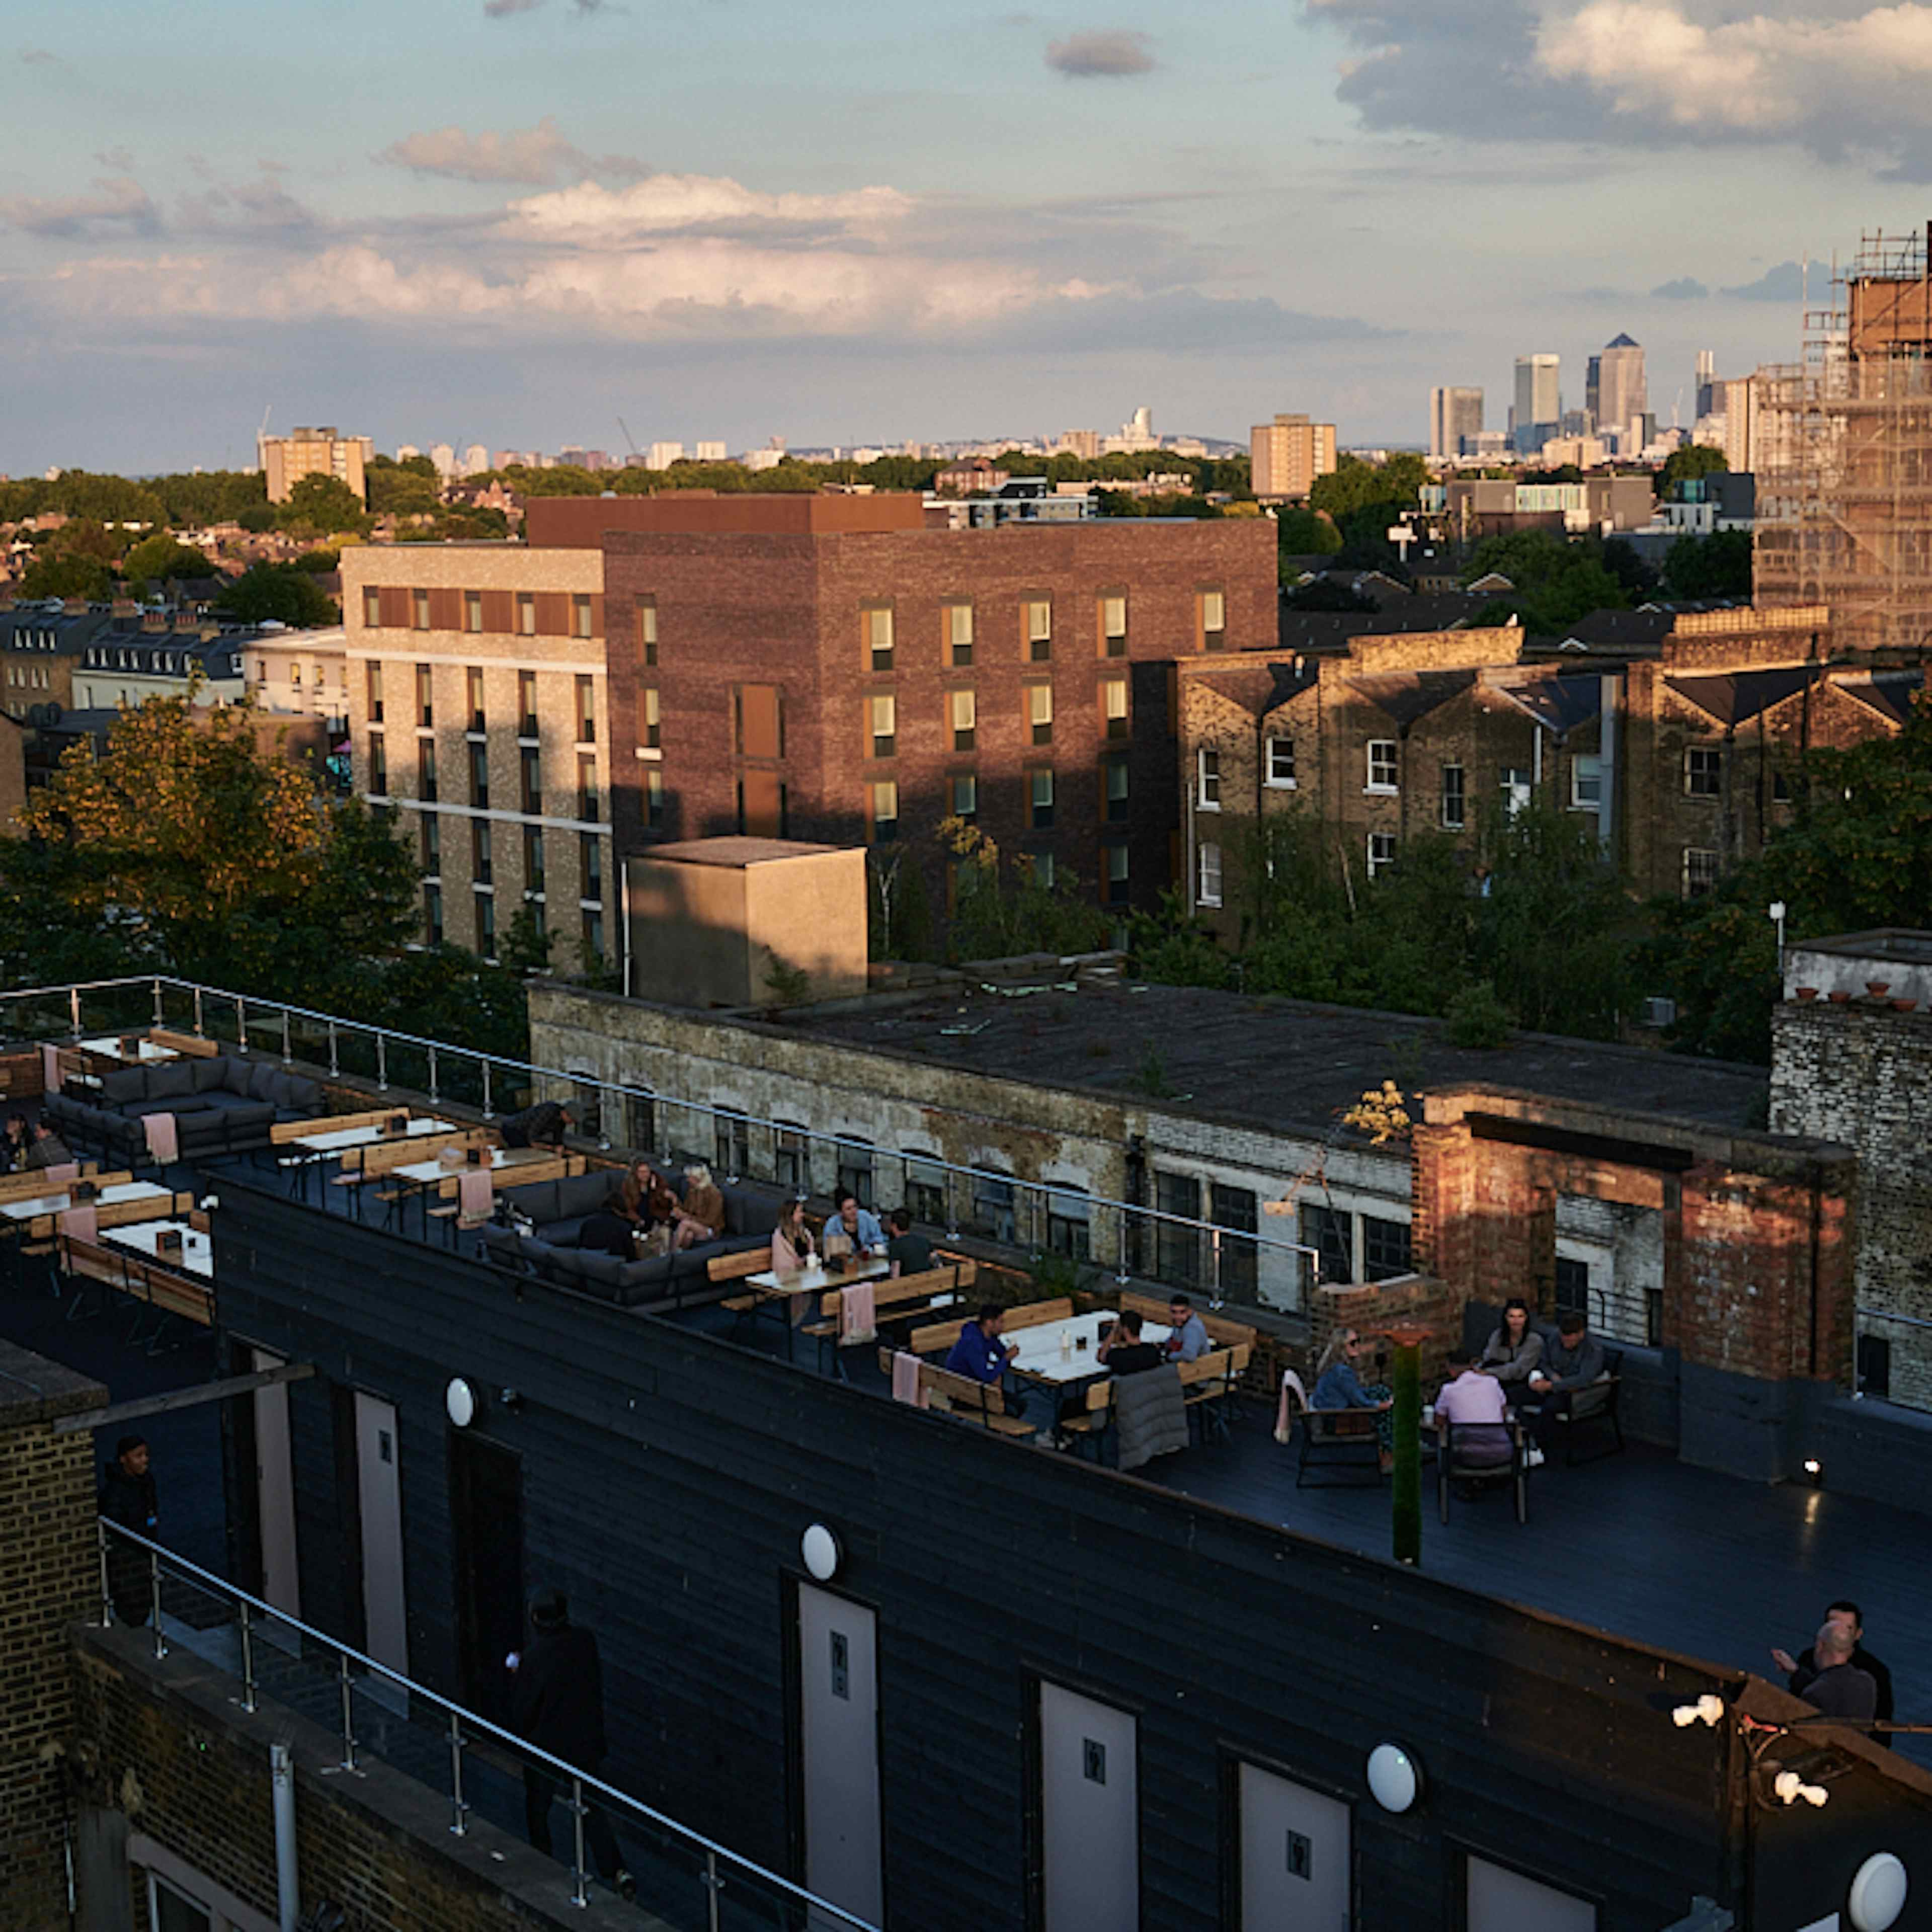 Dalston Roofpark (rooftop) - Dalston Roofpark image 3